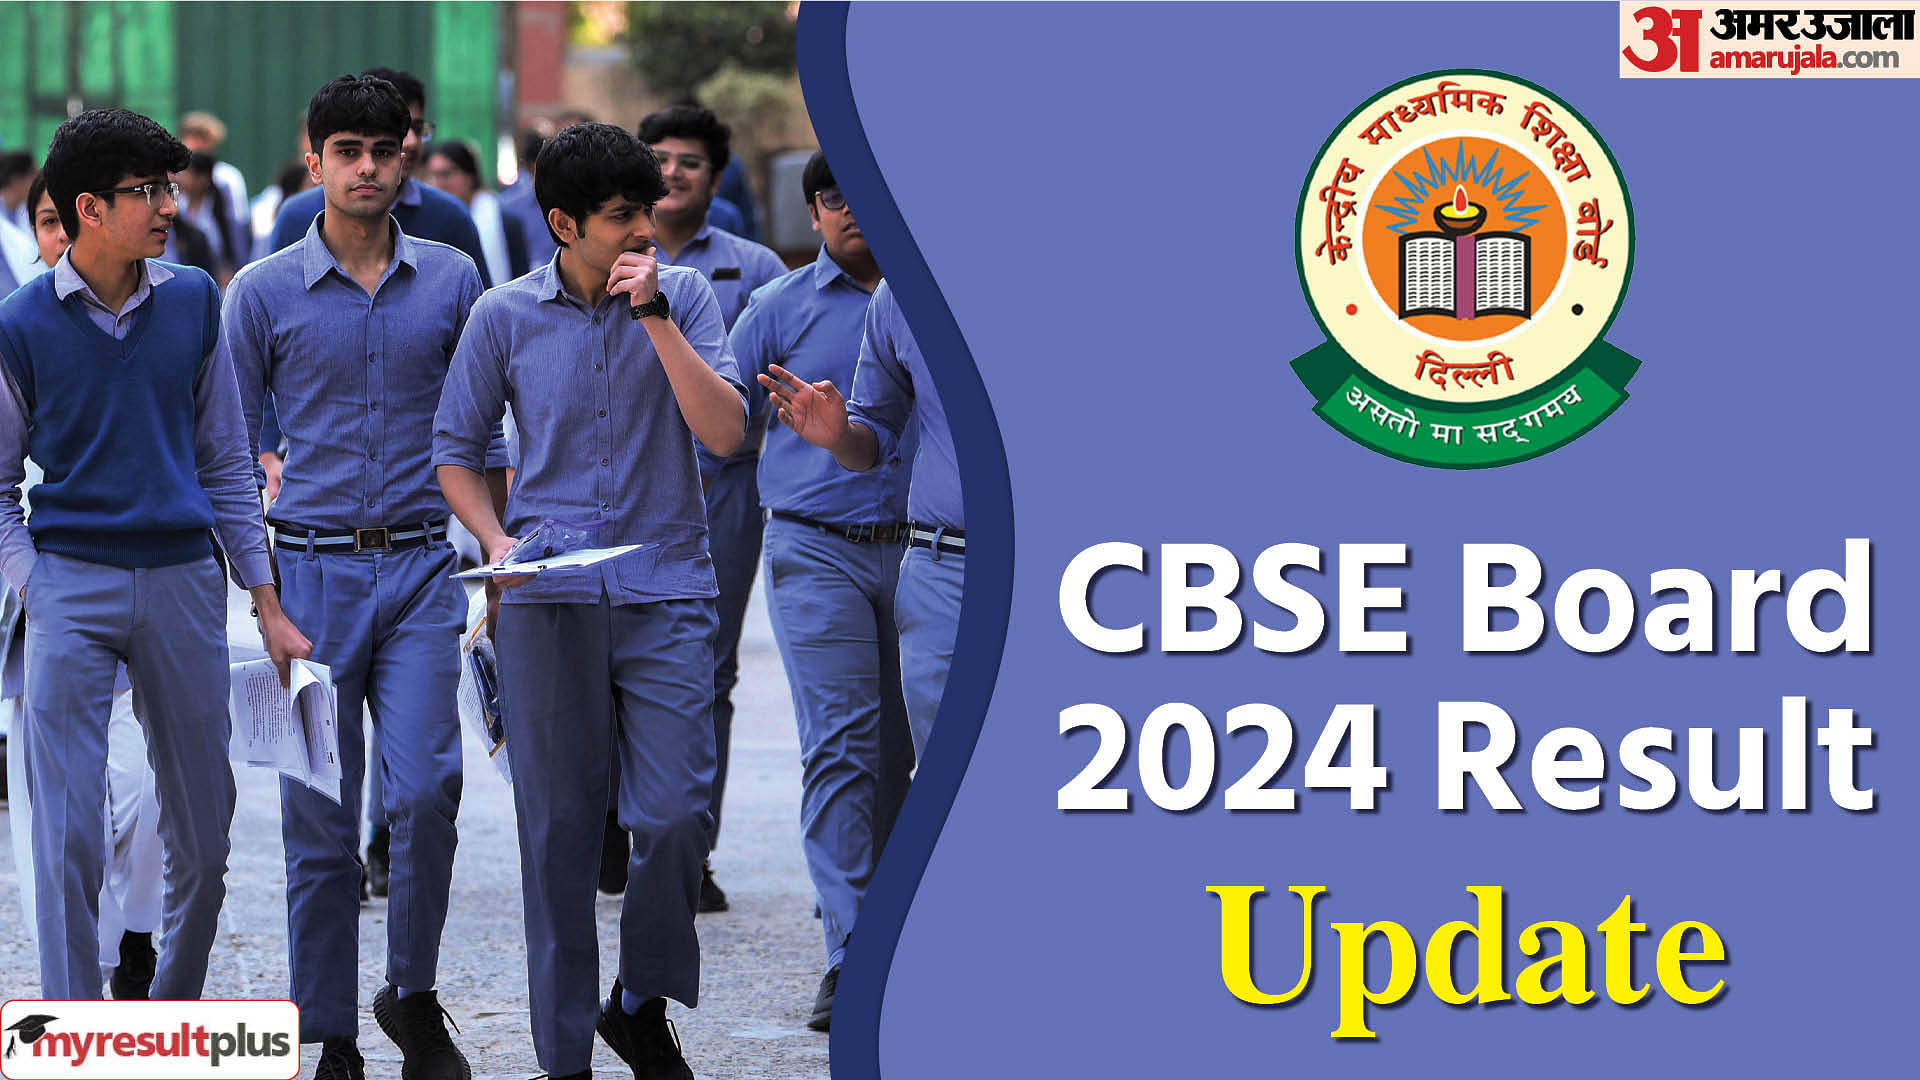 CBSE Board 2024 Results expected soon, check Board’s Mandate here